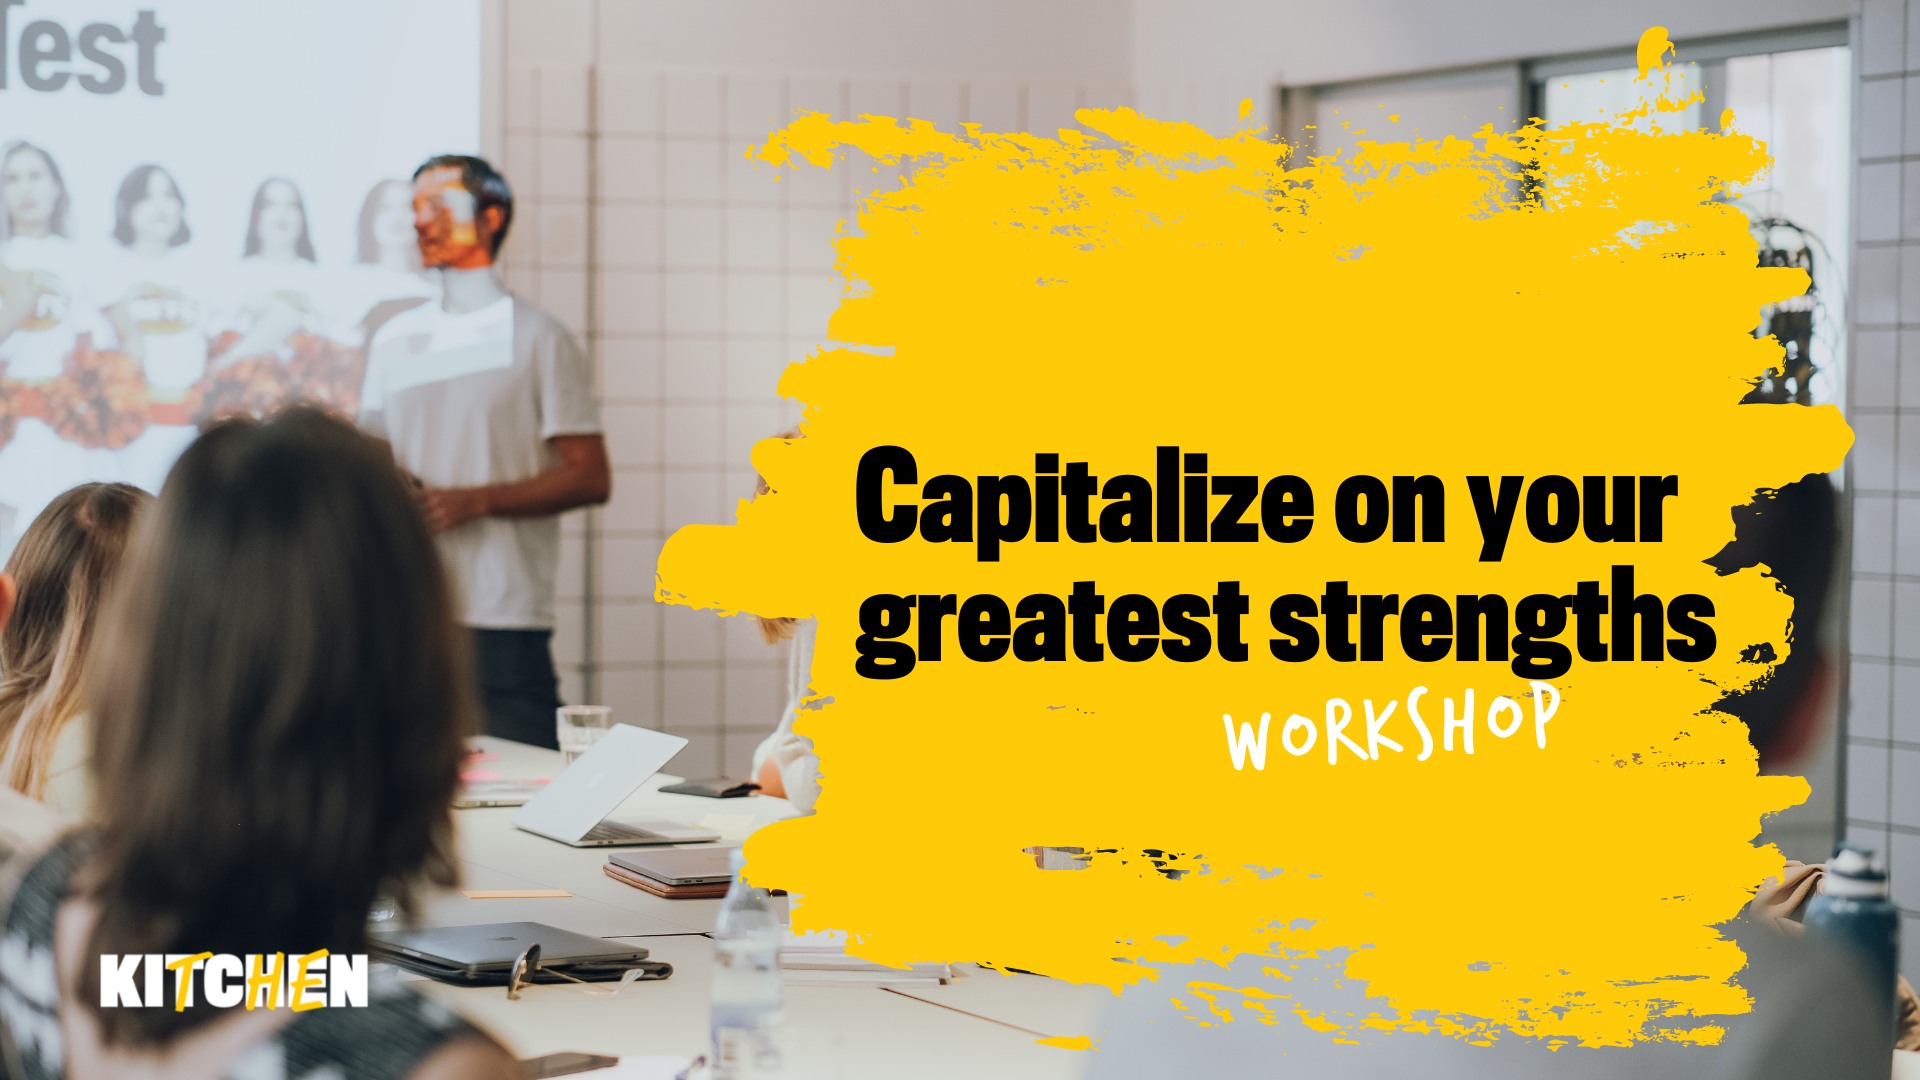 Capitalize on your greatest strengths